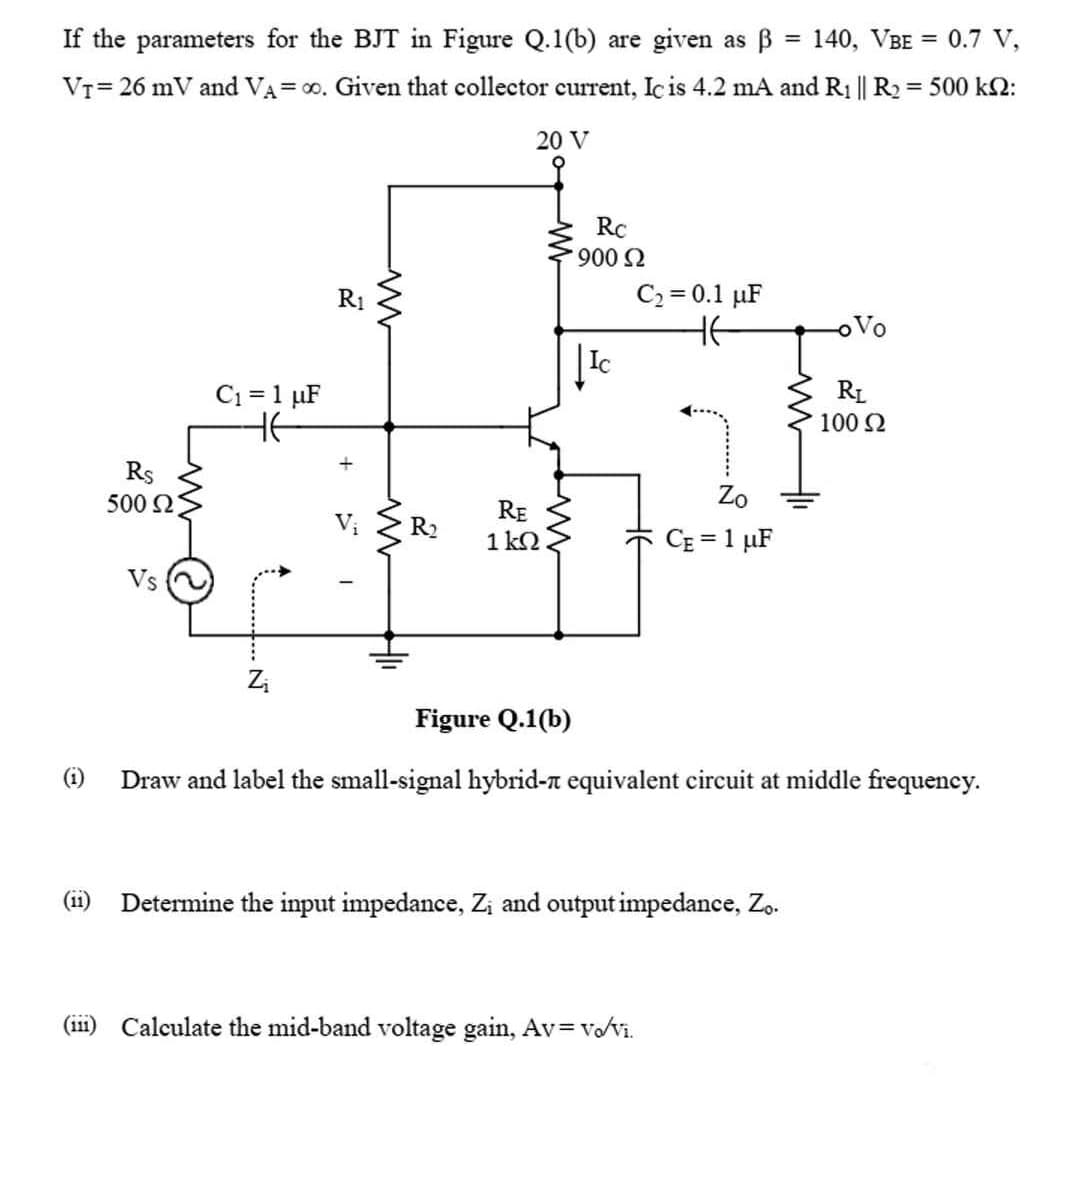 If the parameters for the BJT in Figure Q.1(b) are given as B
140, VBE = 0.7 V,
%3D
VT= 26 mV and VA= 00. Given that collector current, Ic is 4.2 mA and R1 || R2 = 500 k2:
20 V
RC
900 2
C2 = 0.1 µF
HE
R1
Vo
C1 = 1 µF
RL
100 2
Rs
500 2
Zo
RE
1 k2
R2
CE = 1 µF
Vs
Figure Q.1(b)
(i)
Draw and label the small-signal hybrid-n equivalent circuit at middle frequency.
(ii) Determine the input impedance, Zi and output impedance, Zo.
(ii1) Calculate the mid-band voltage gain, Av= Vo/vi.
